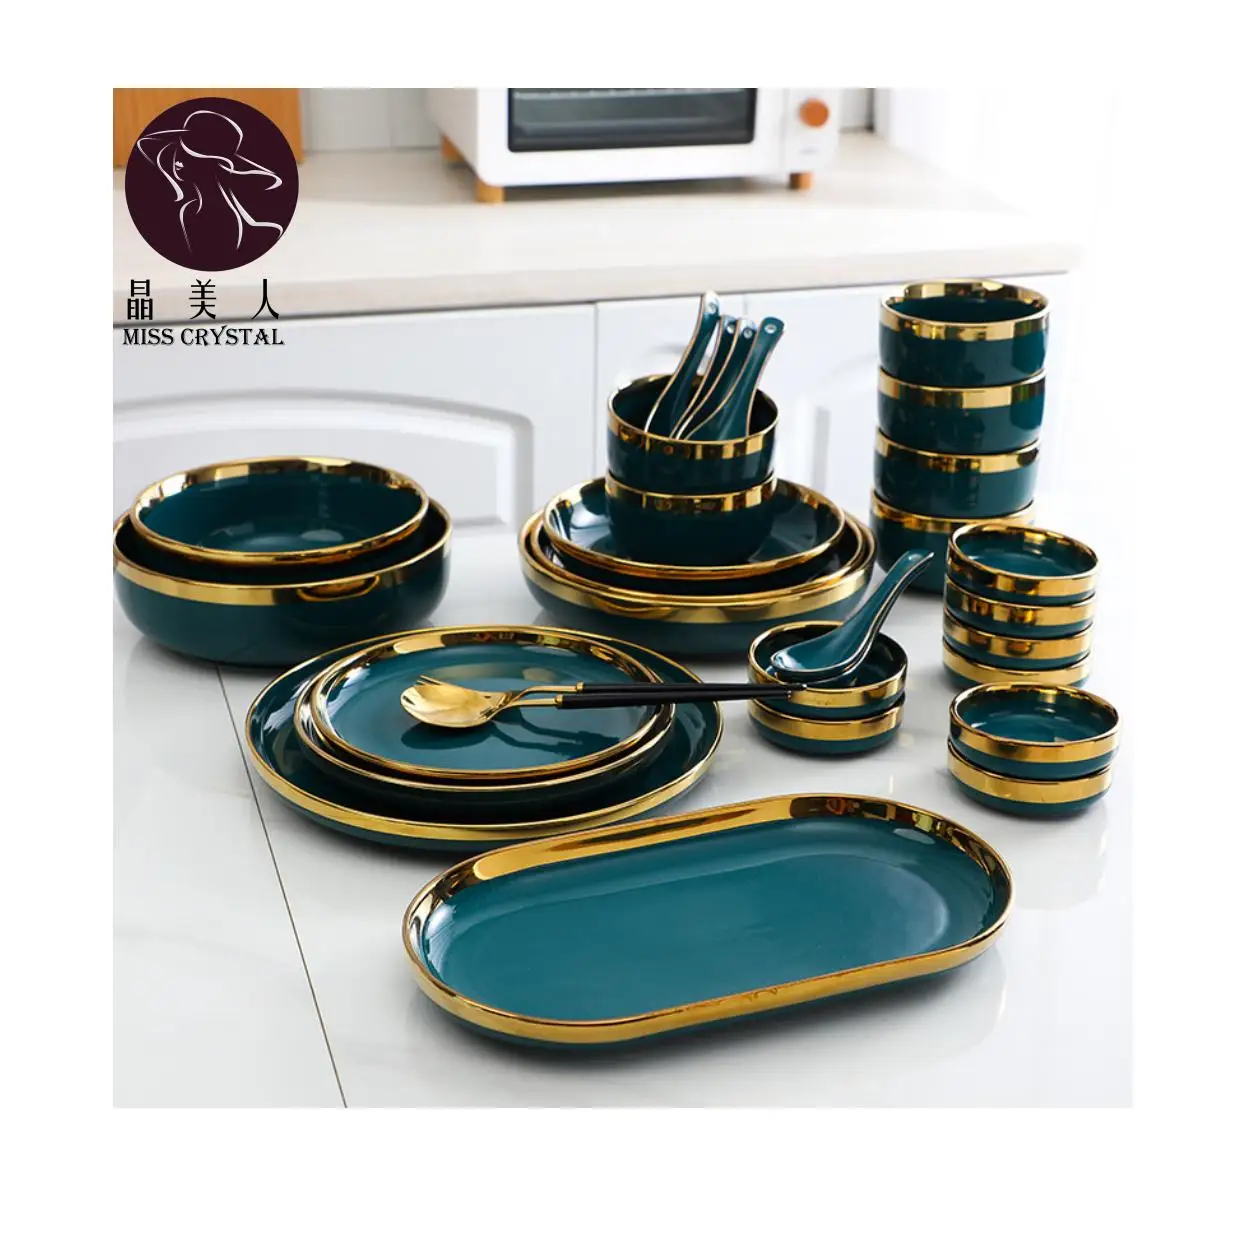 

Ceramic Dinner Plates Steak Food Dessert Plate Green Salad Soup Bowl Dinnerware Set Dishes Plates and Bowls Set for Family Hote, Green with gold rim